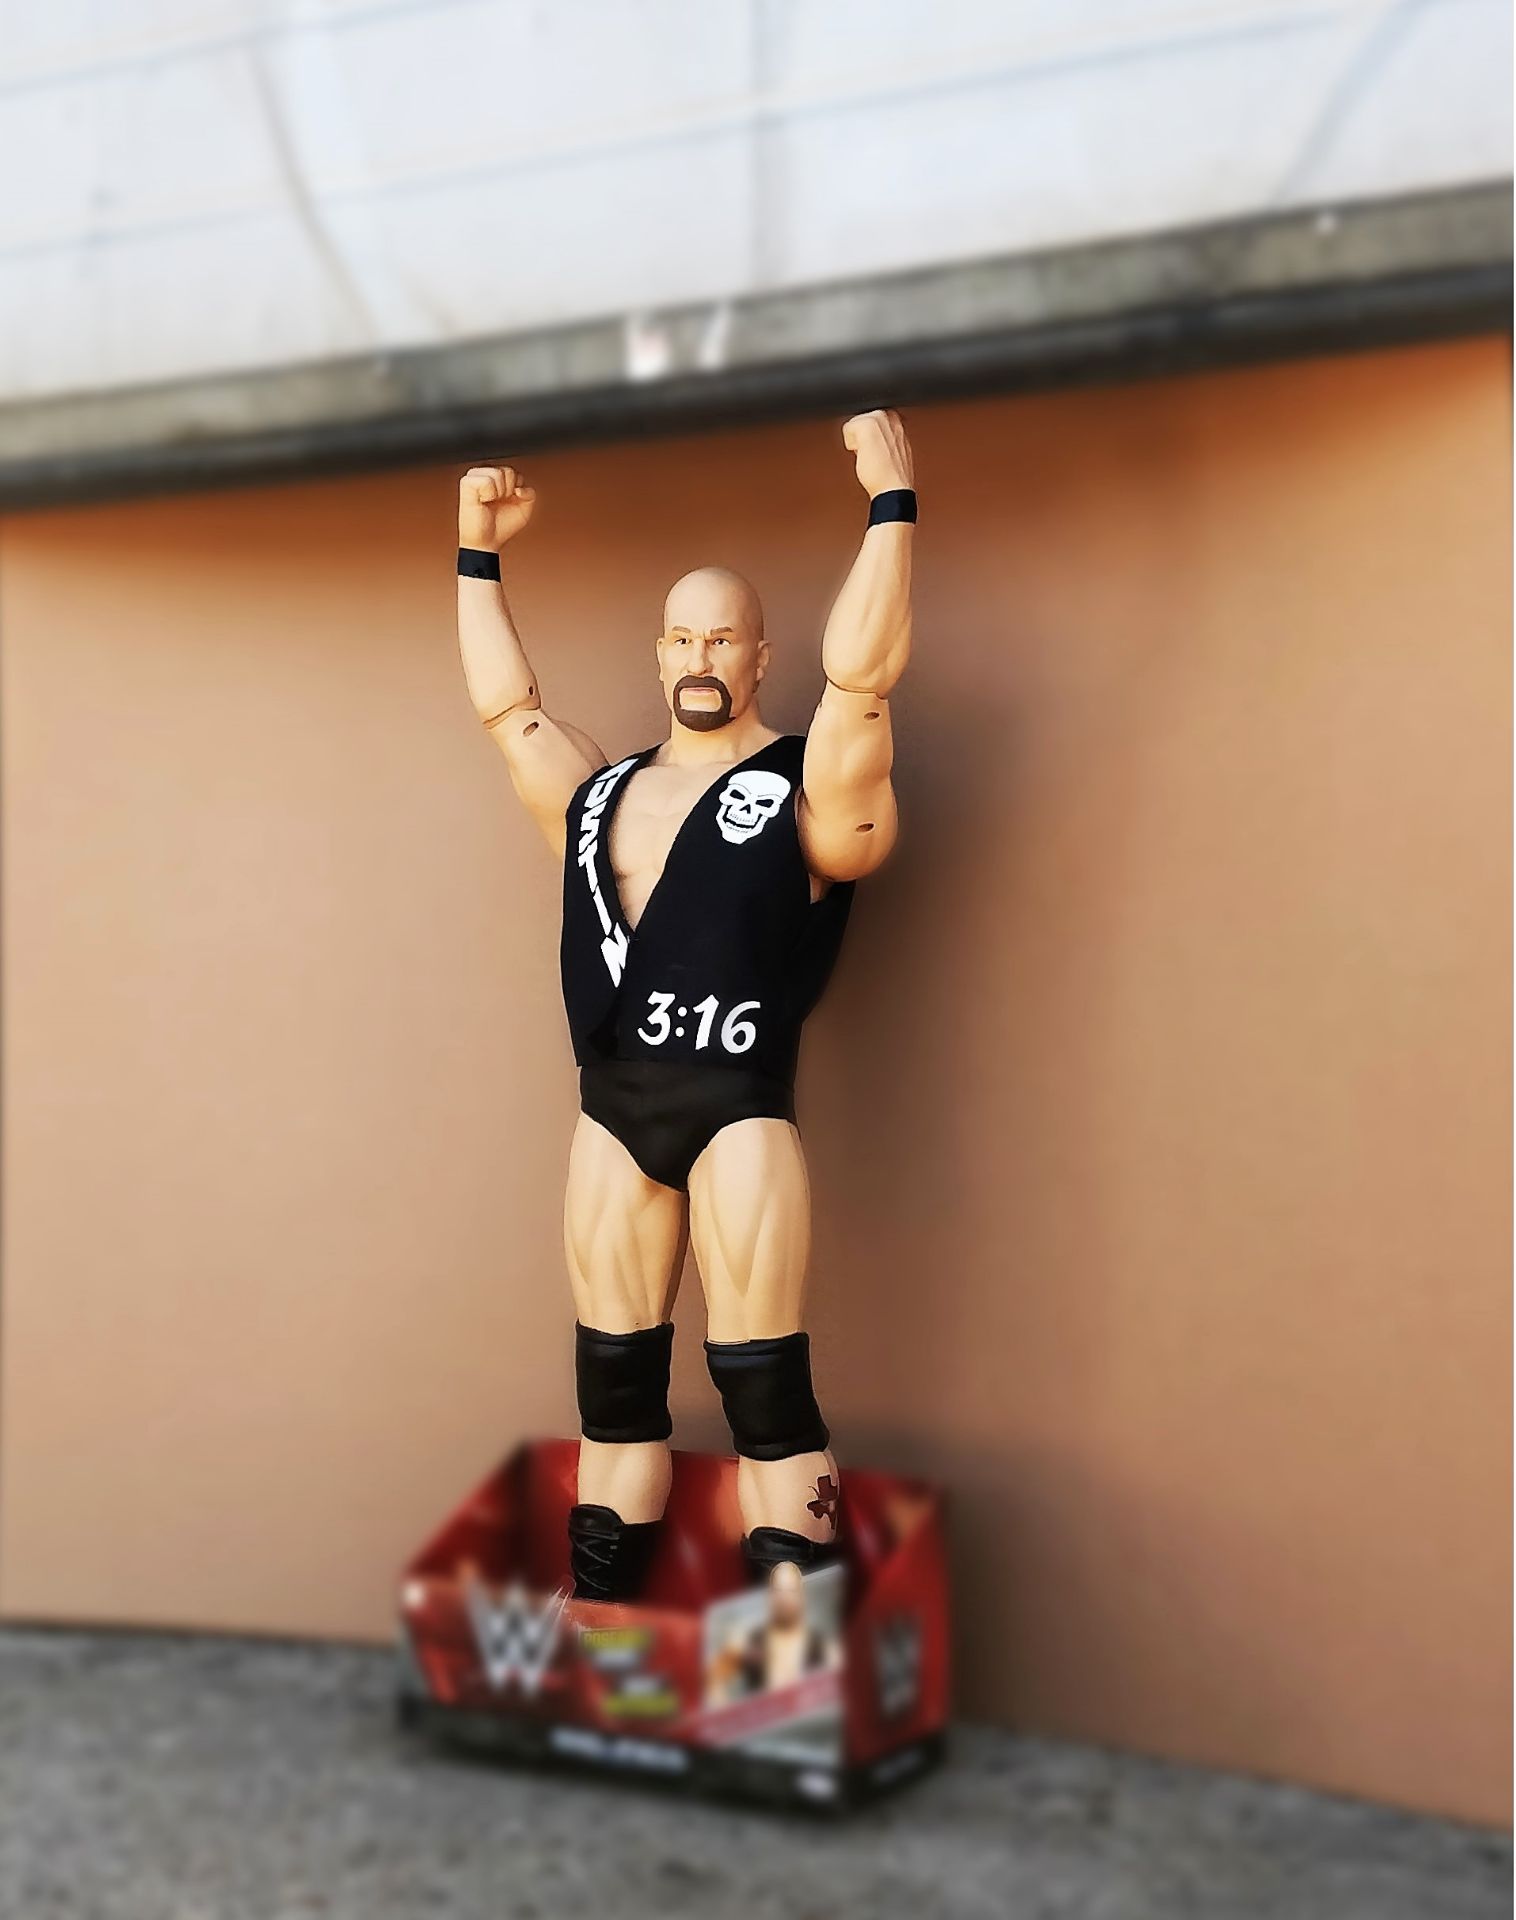 V Brand New Massive 31" WWE Stone Cold Steve Austin Action Figures - 3count.co.uk Price £28.99 - 8 - Image 4 of 4